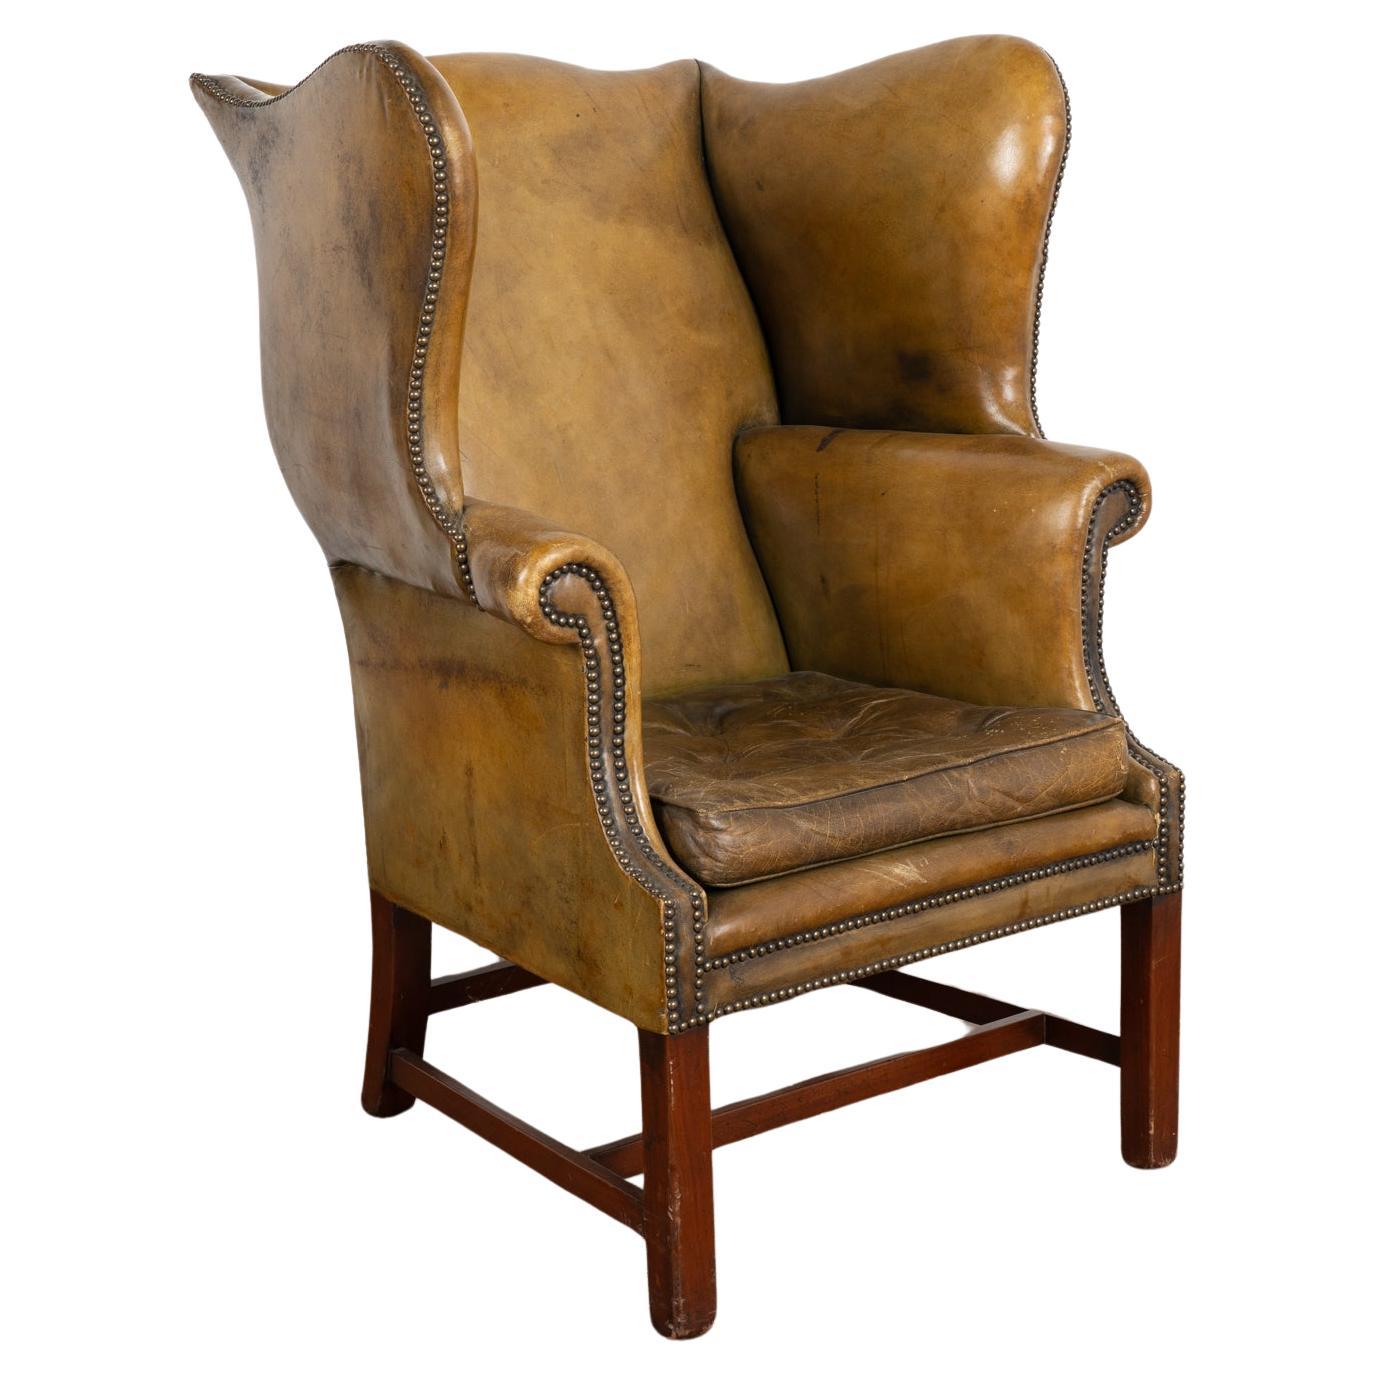 Vintage Olive Green Leather Wingback Armchair, Denmark circa 1960 For Sale